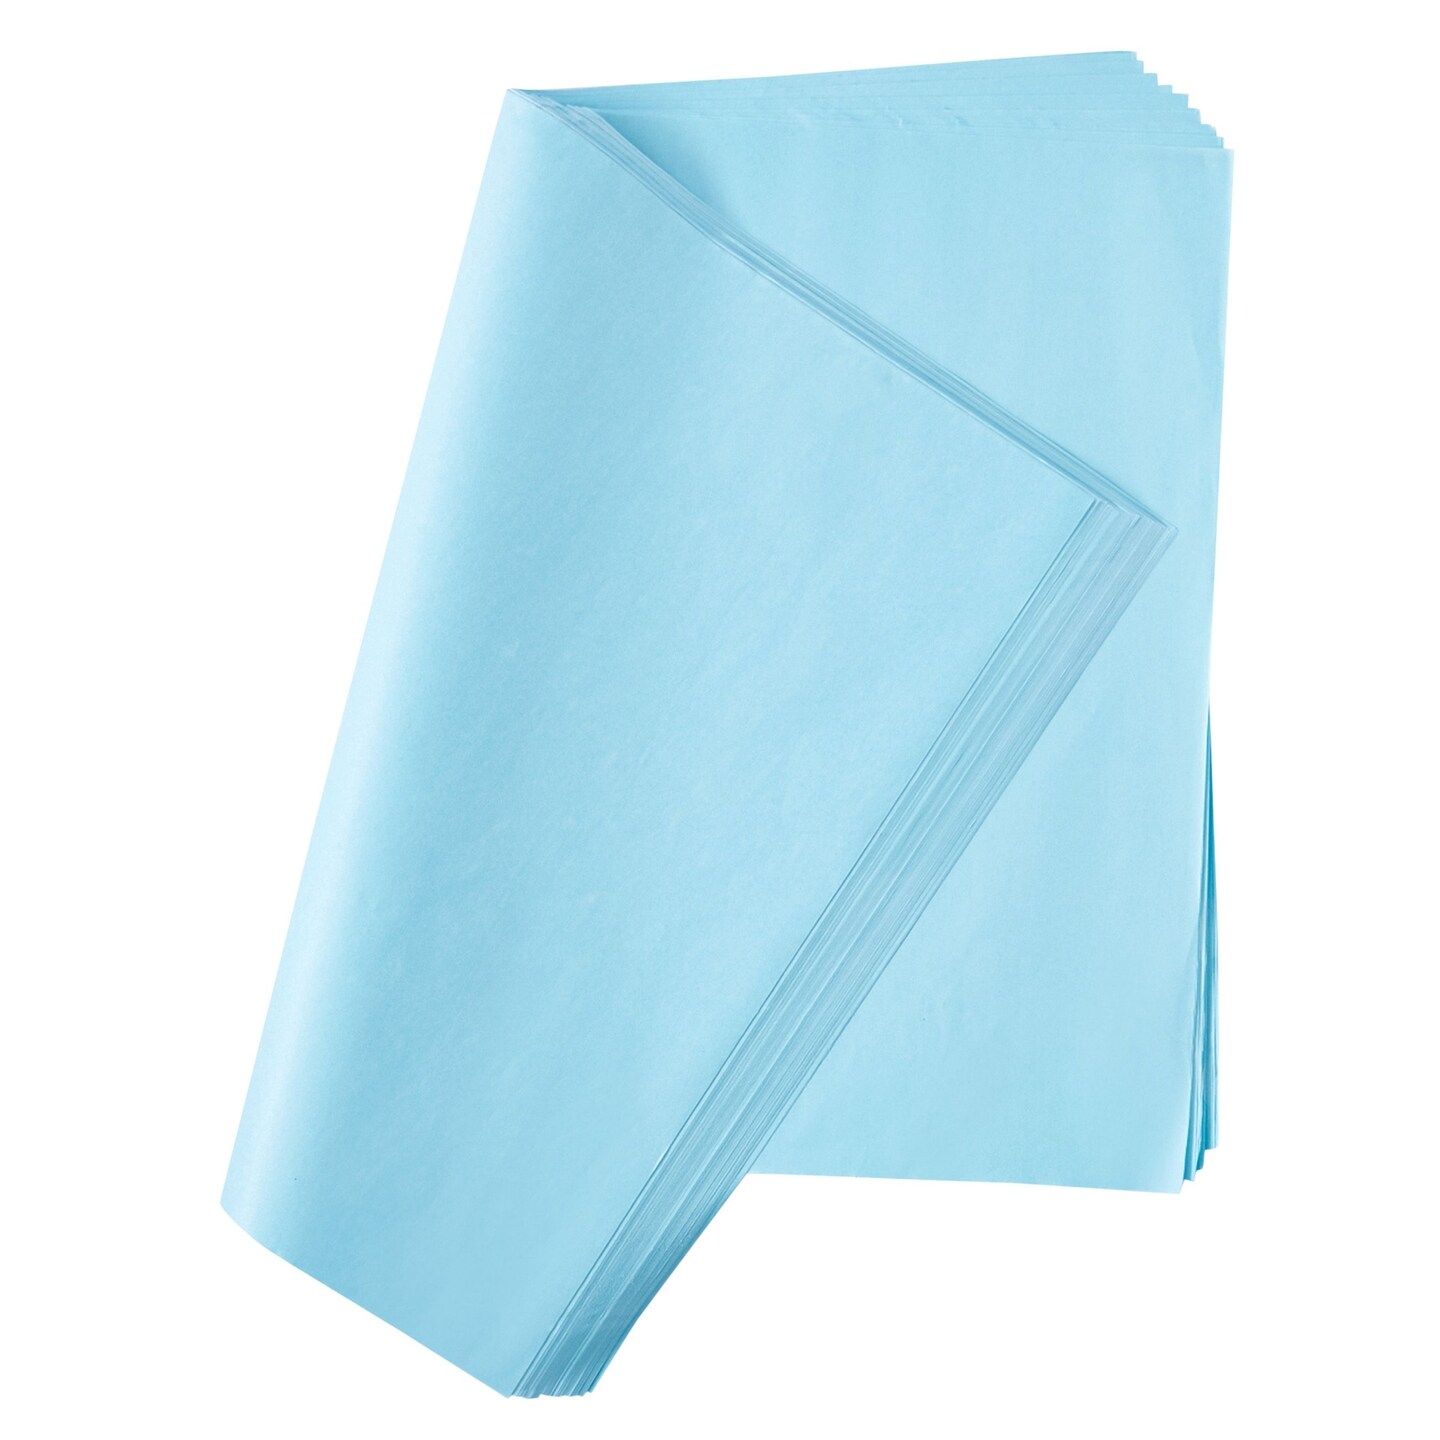 Teal Tissue Paper Squares, Bulk 24 Sheets, Premium Gift Wrap and